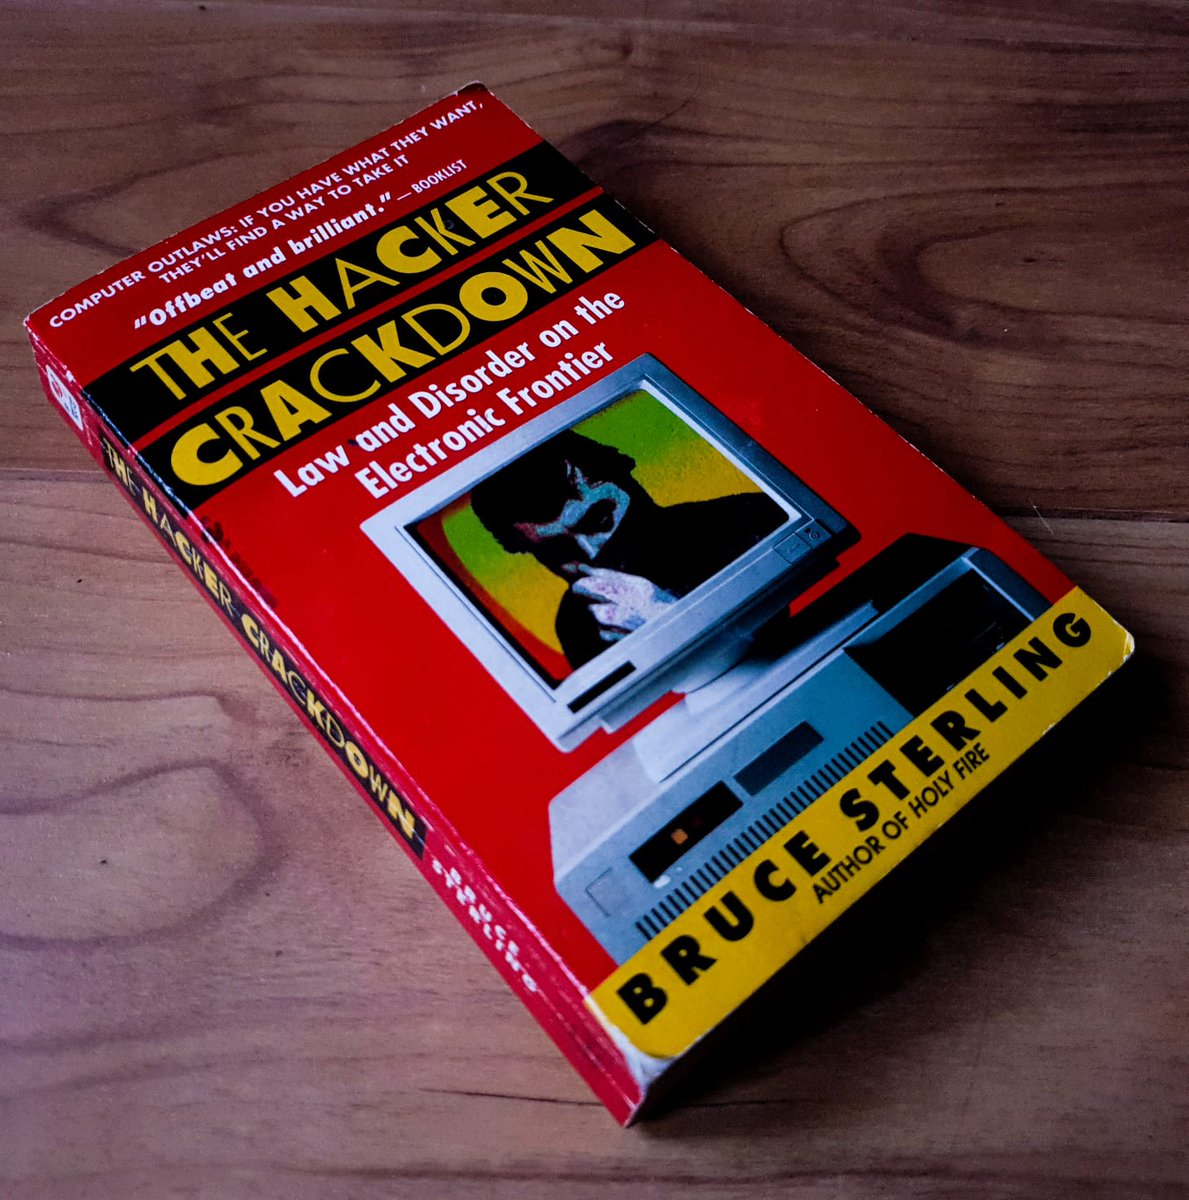 . @Bruces' 'The Hacker Crackdown' - a history of hacker sub-culture, from Operation Sun Devil to the formation of the  @EFF "This book is a historic chronicle of the outlaw culture of the electronic frontier." #AmReading  #QuarantineBookClub